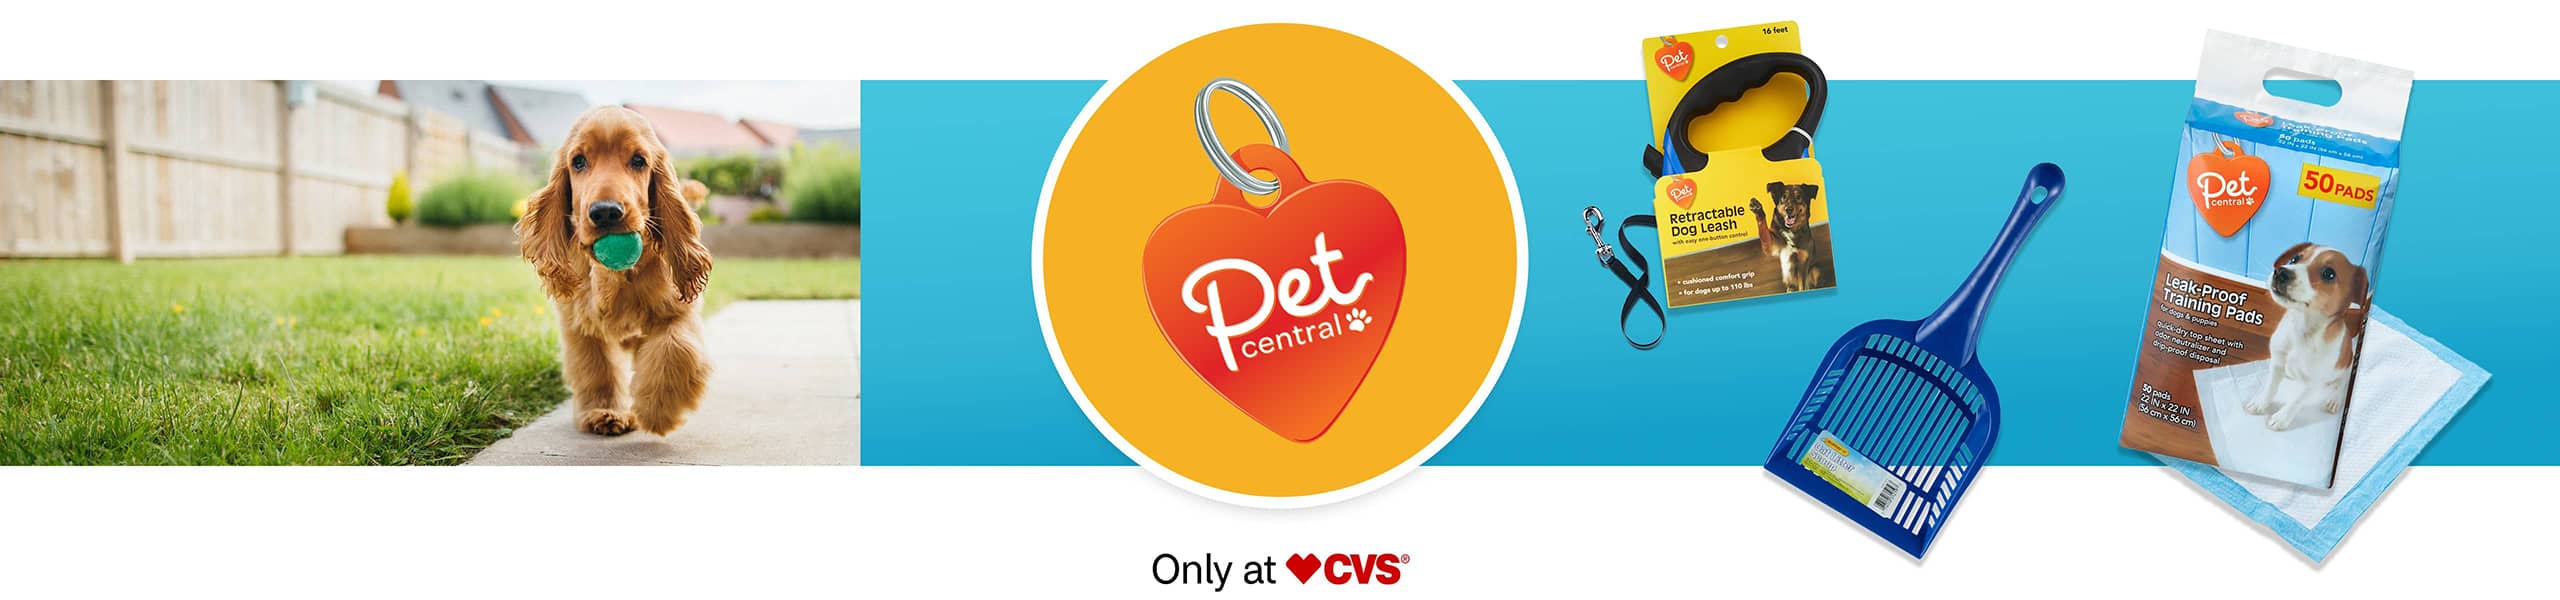 Pet Central® pet cleaning supplies and training pads. Pet Central®. Only at CVS®